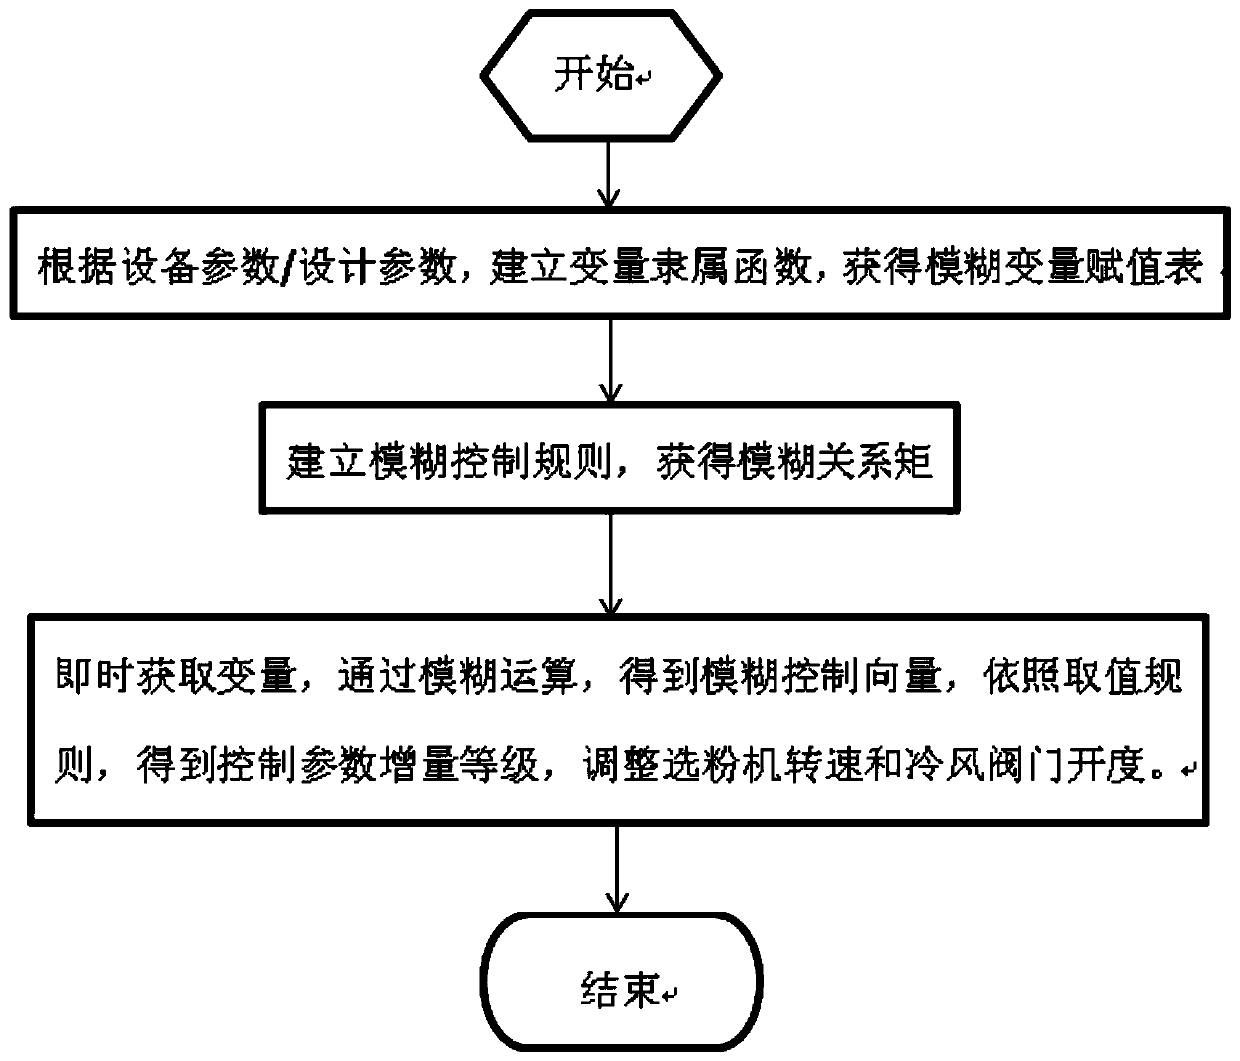 Fuzzy Control Method of Cement Mill Powder Sorting System